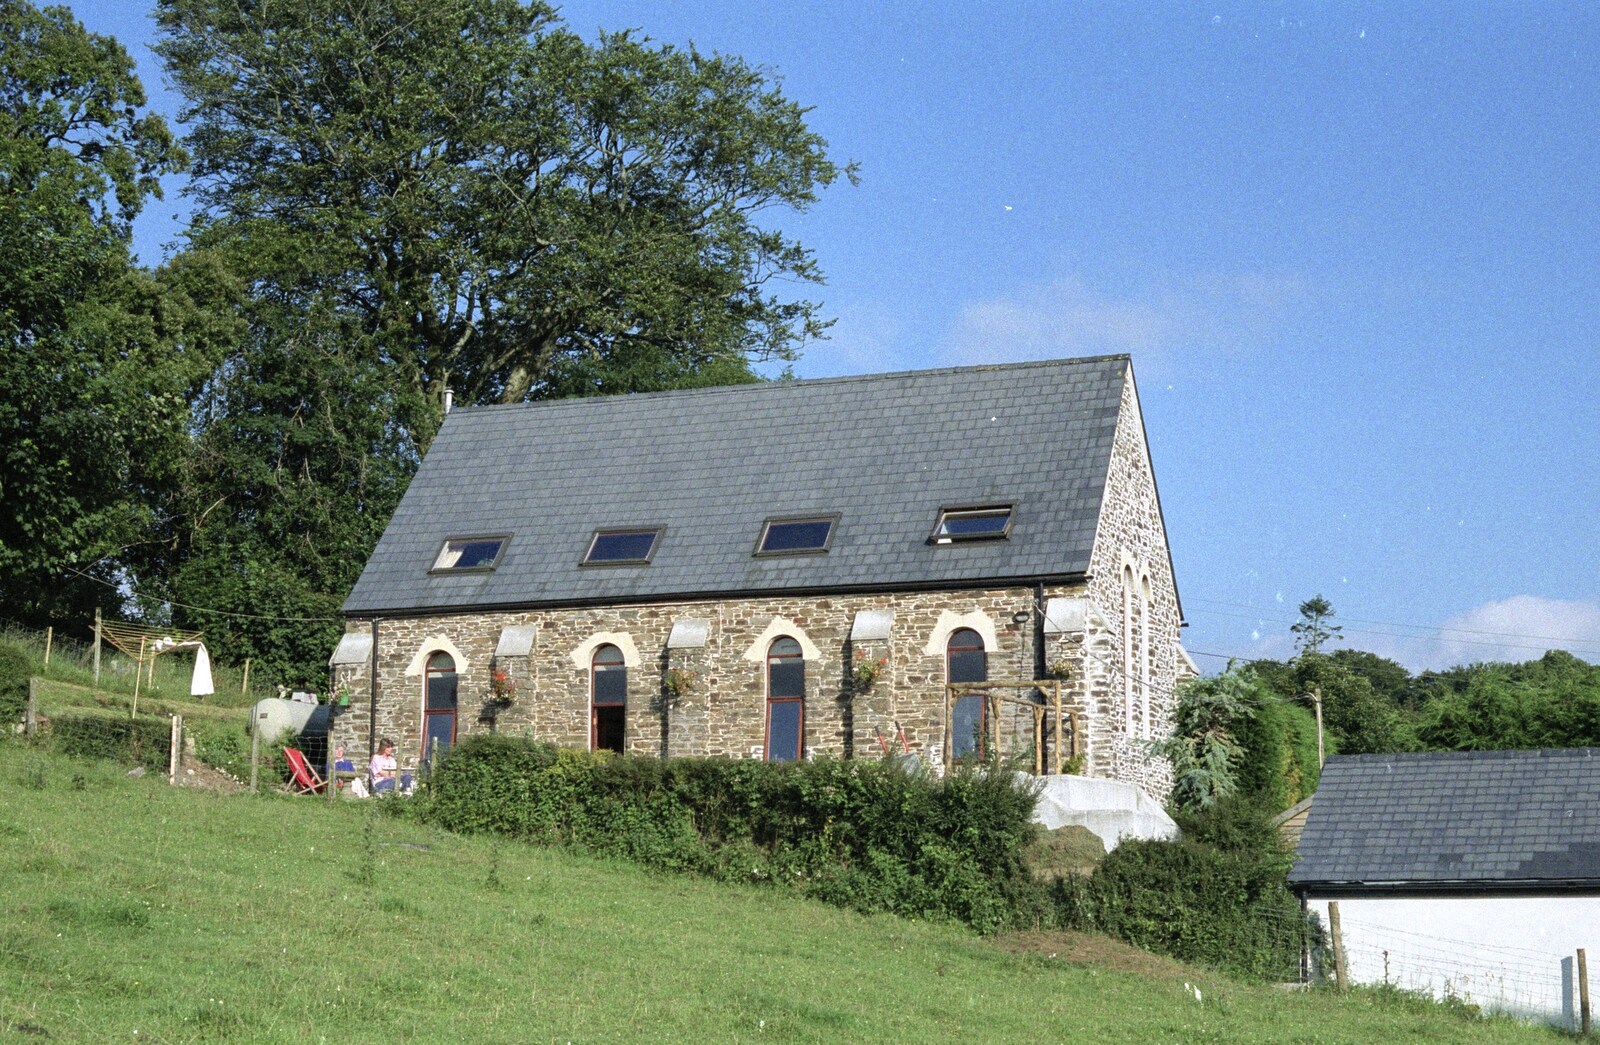 The Chapel, from the field next door from Plymouth and The Chapel, Hoo Meavy, Devon - 25th July 1991